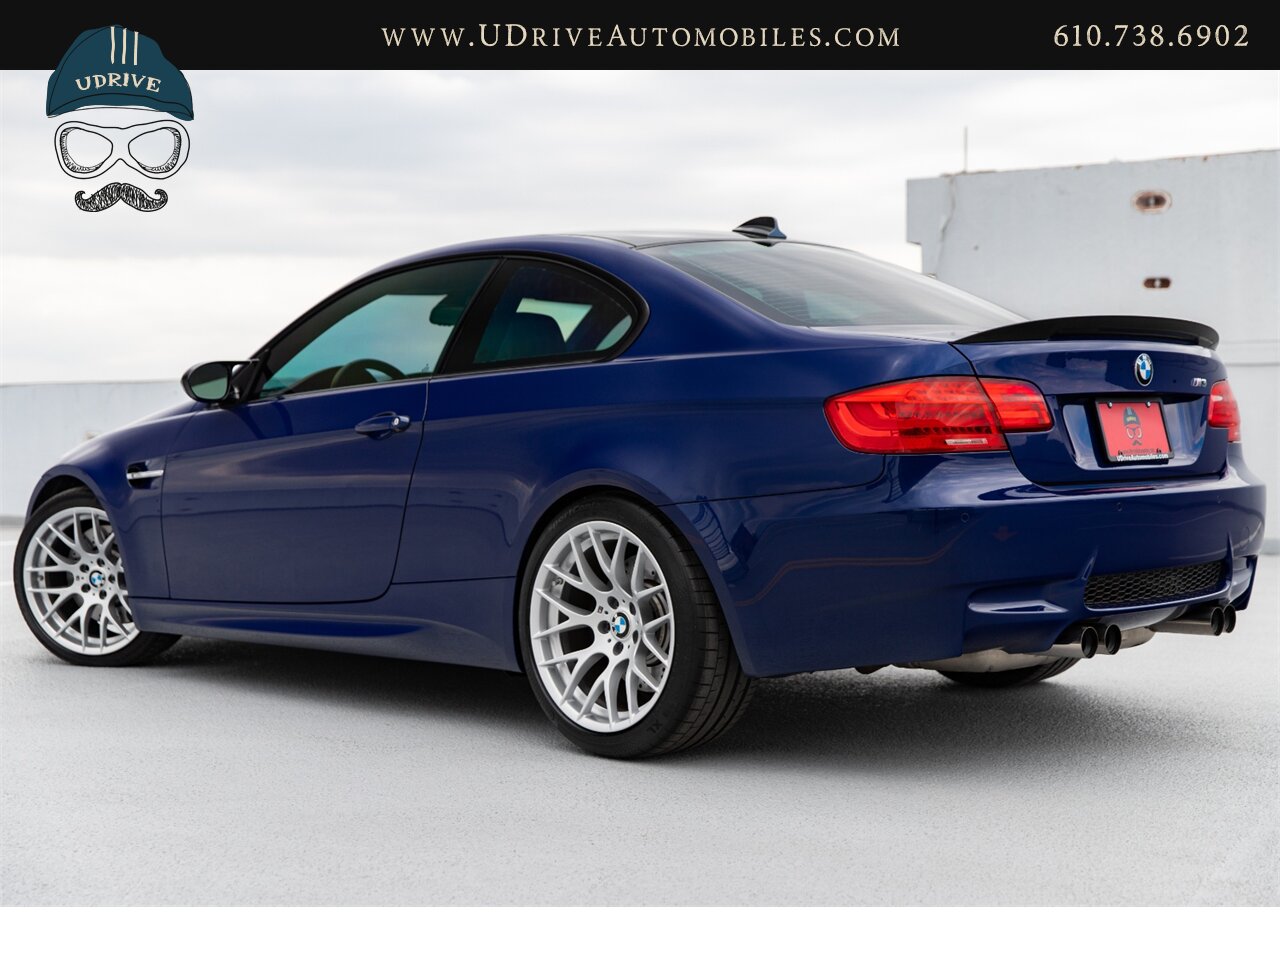 2011 BMW M3 E92 6 Speed Manual Competition Pkg Interlagos Blue  16k Miles Nav PDC EDC Comf Acc - Photo 6 - West Chester, PA 19382